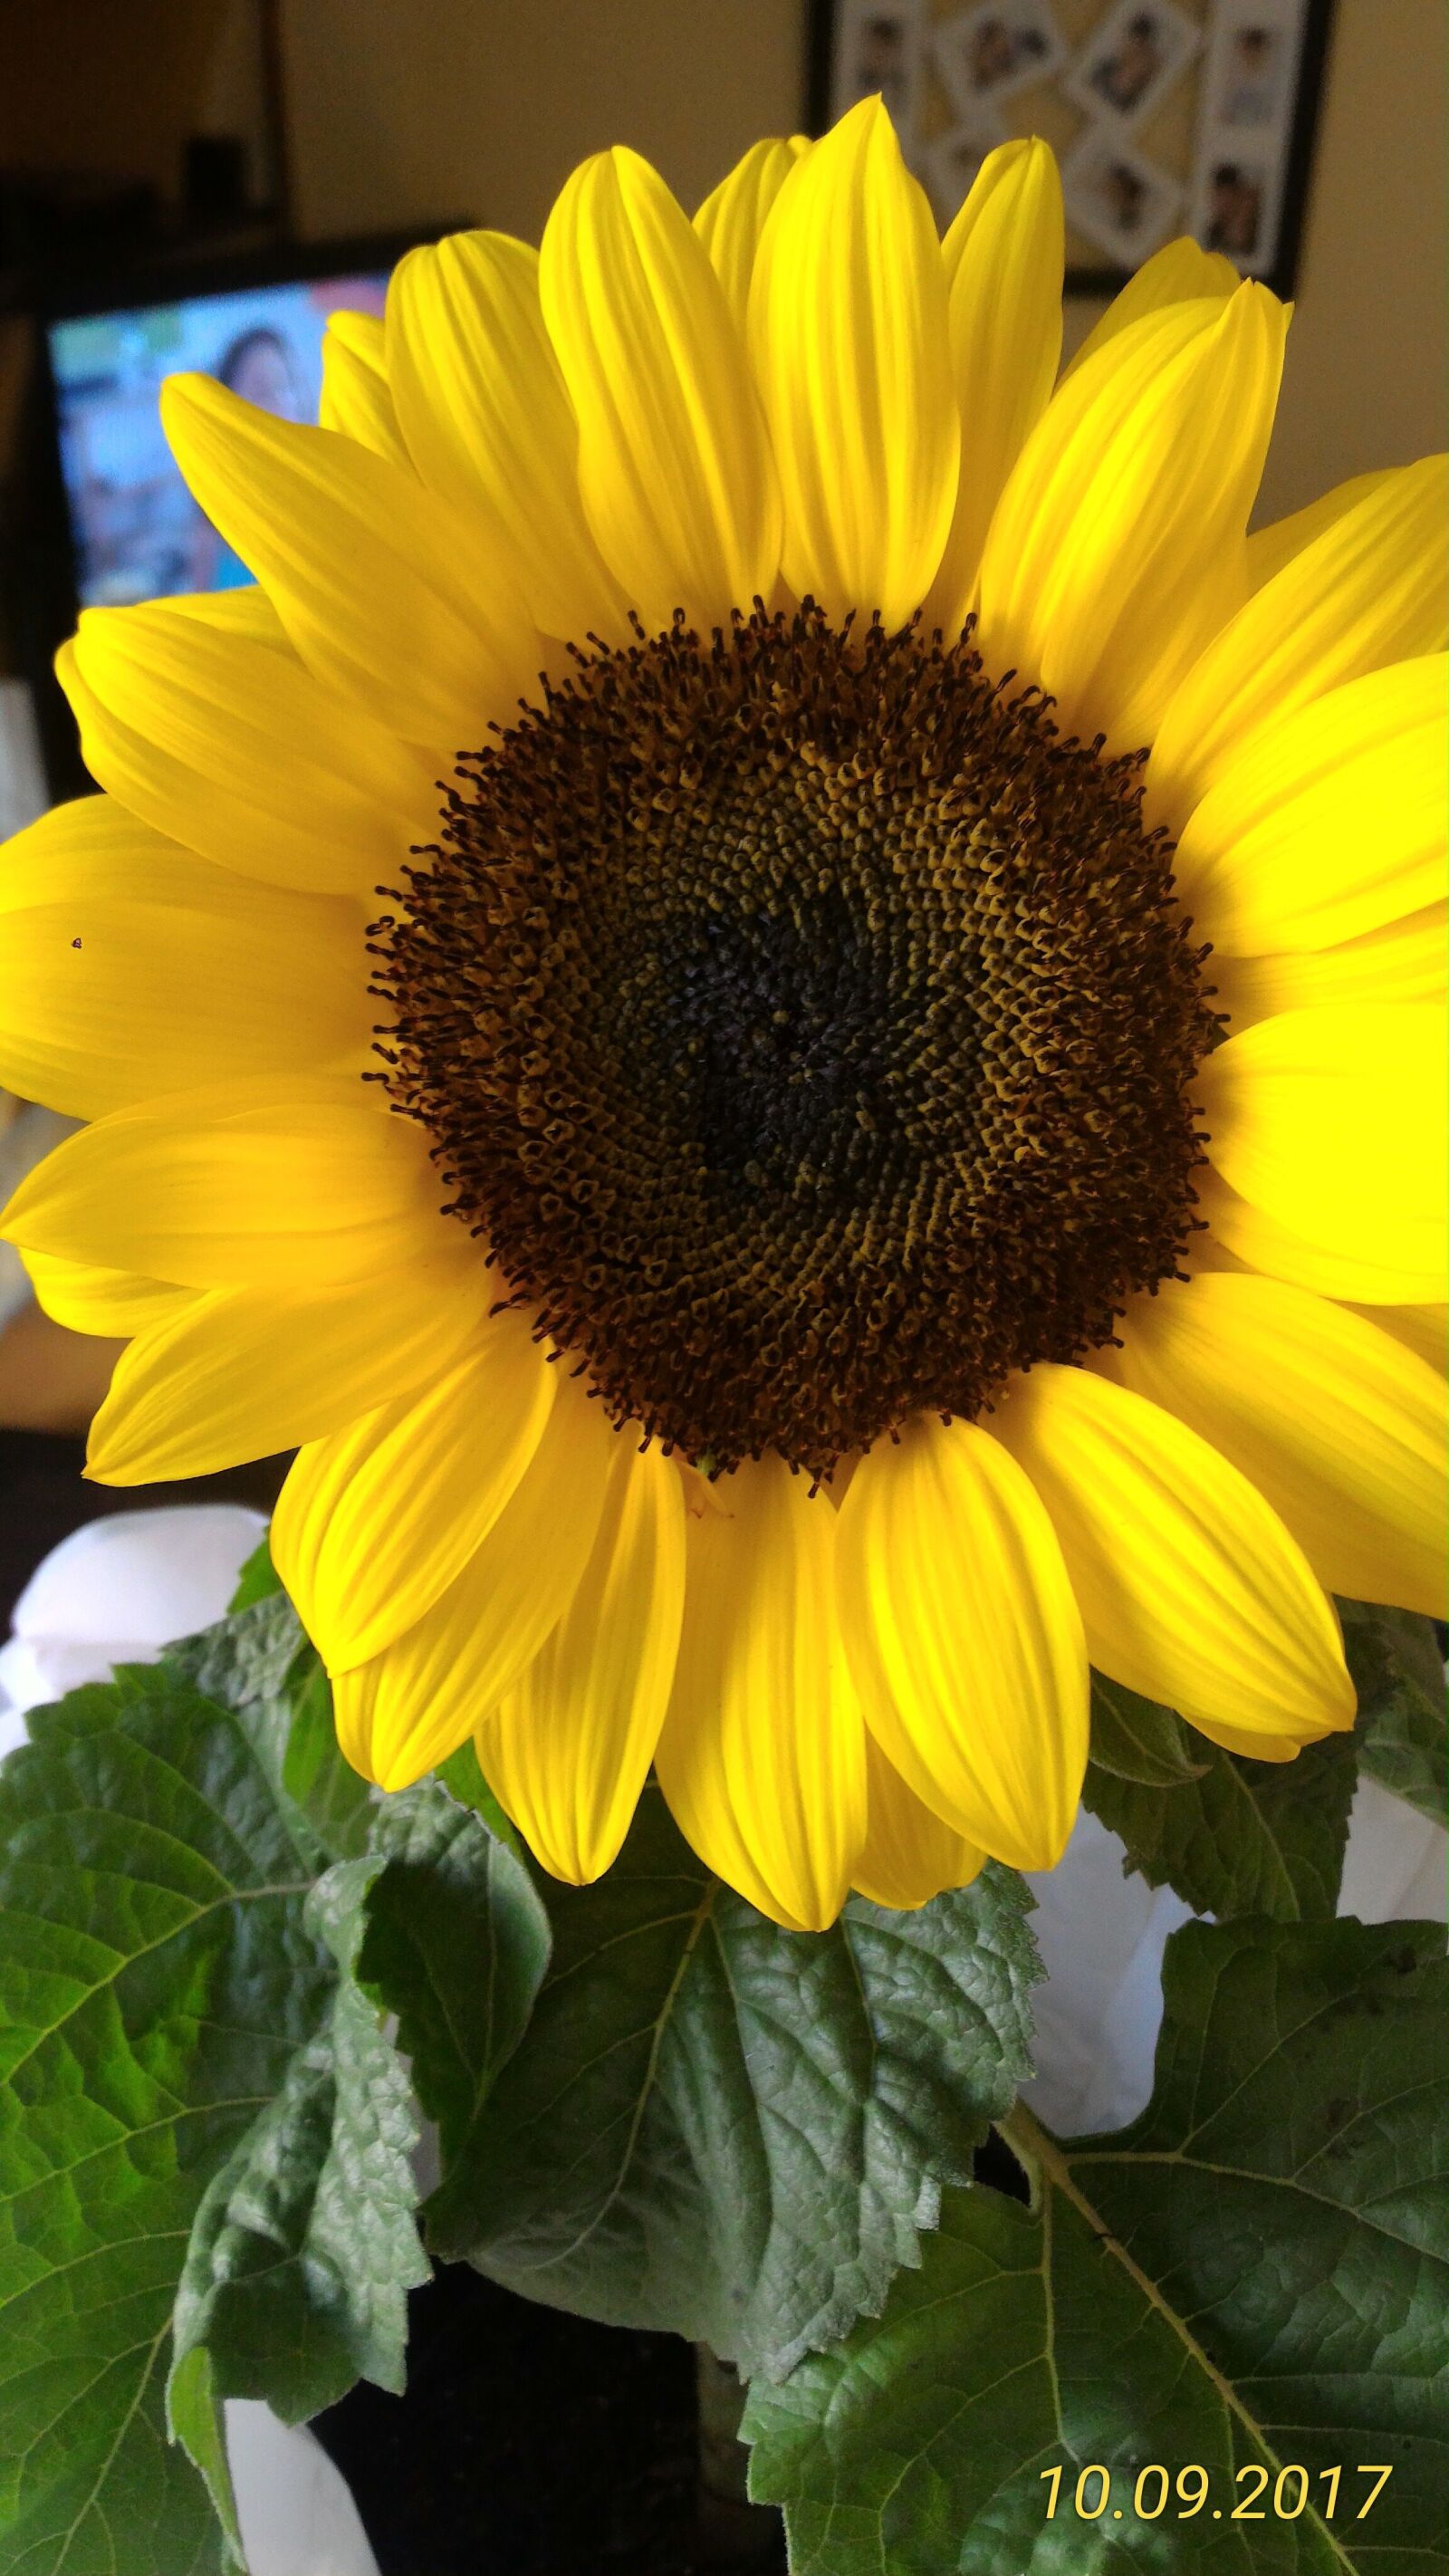 ASUS Z00AD sample photo. Sunflower, plant, yellow photography